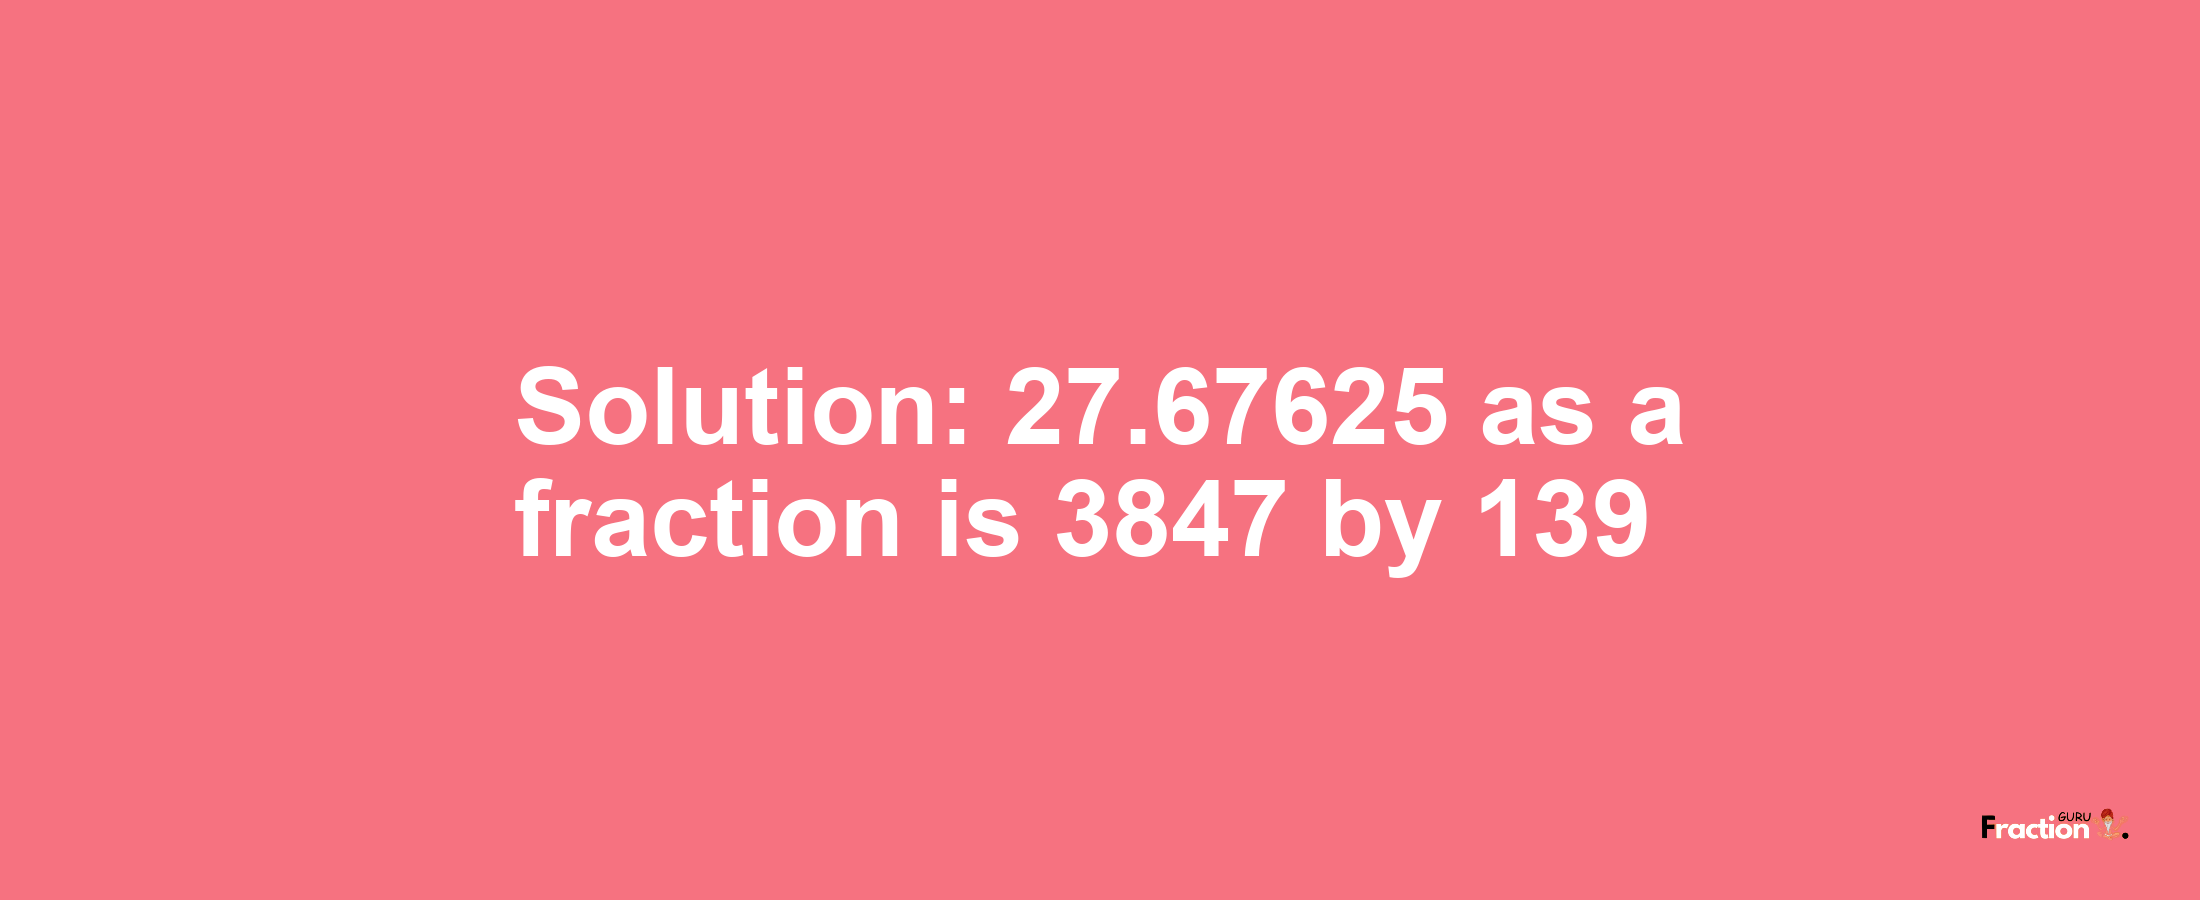 Solution:27.67625 as a fraction is 3847/139